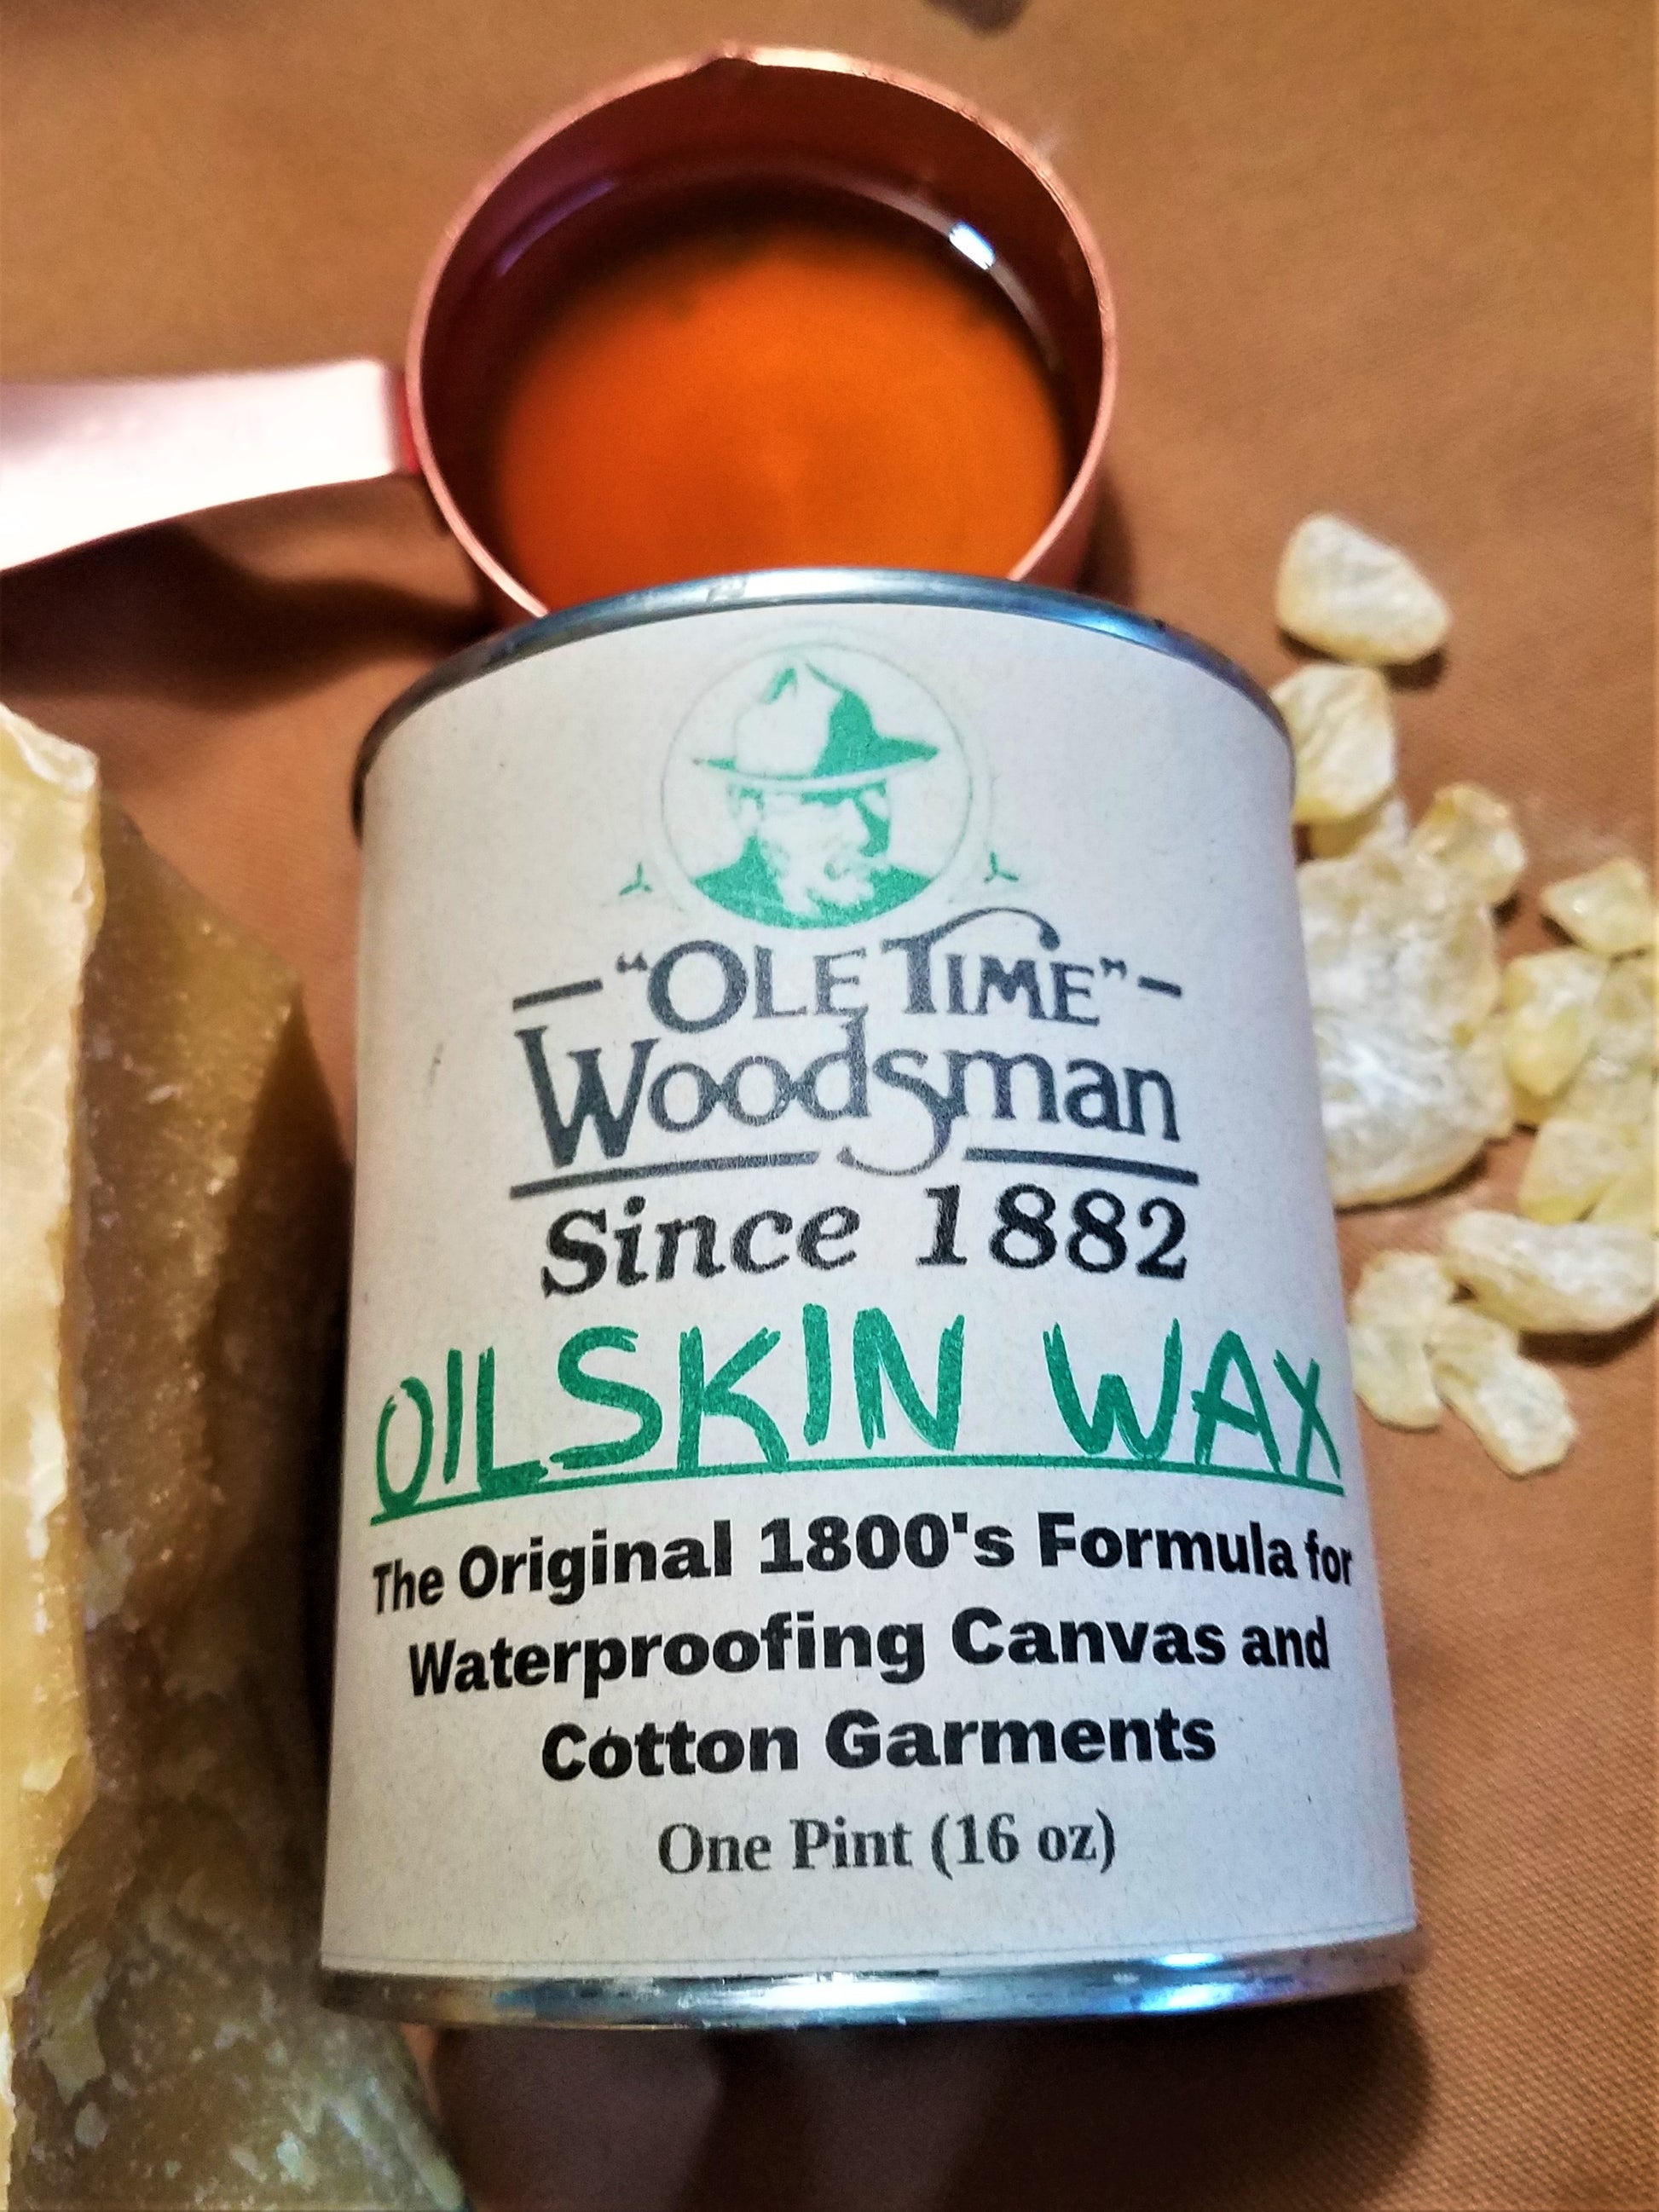 Ole Time Woodsman Oilskin Wax: The Original 1800's Civil War Formula for Waterproofing Canvas and Cotton Garments. (Free Shipping in USA) - Ole Time Woodsman Fly Dope "Since 1882, The World's First and Best Protection Against All Biting Insects!"